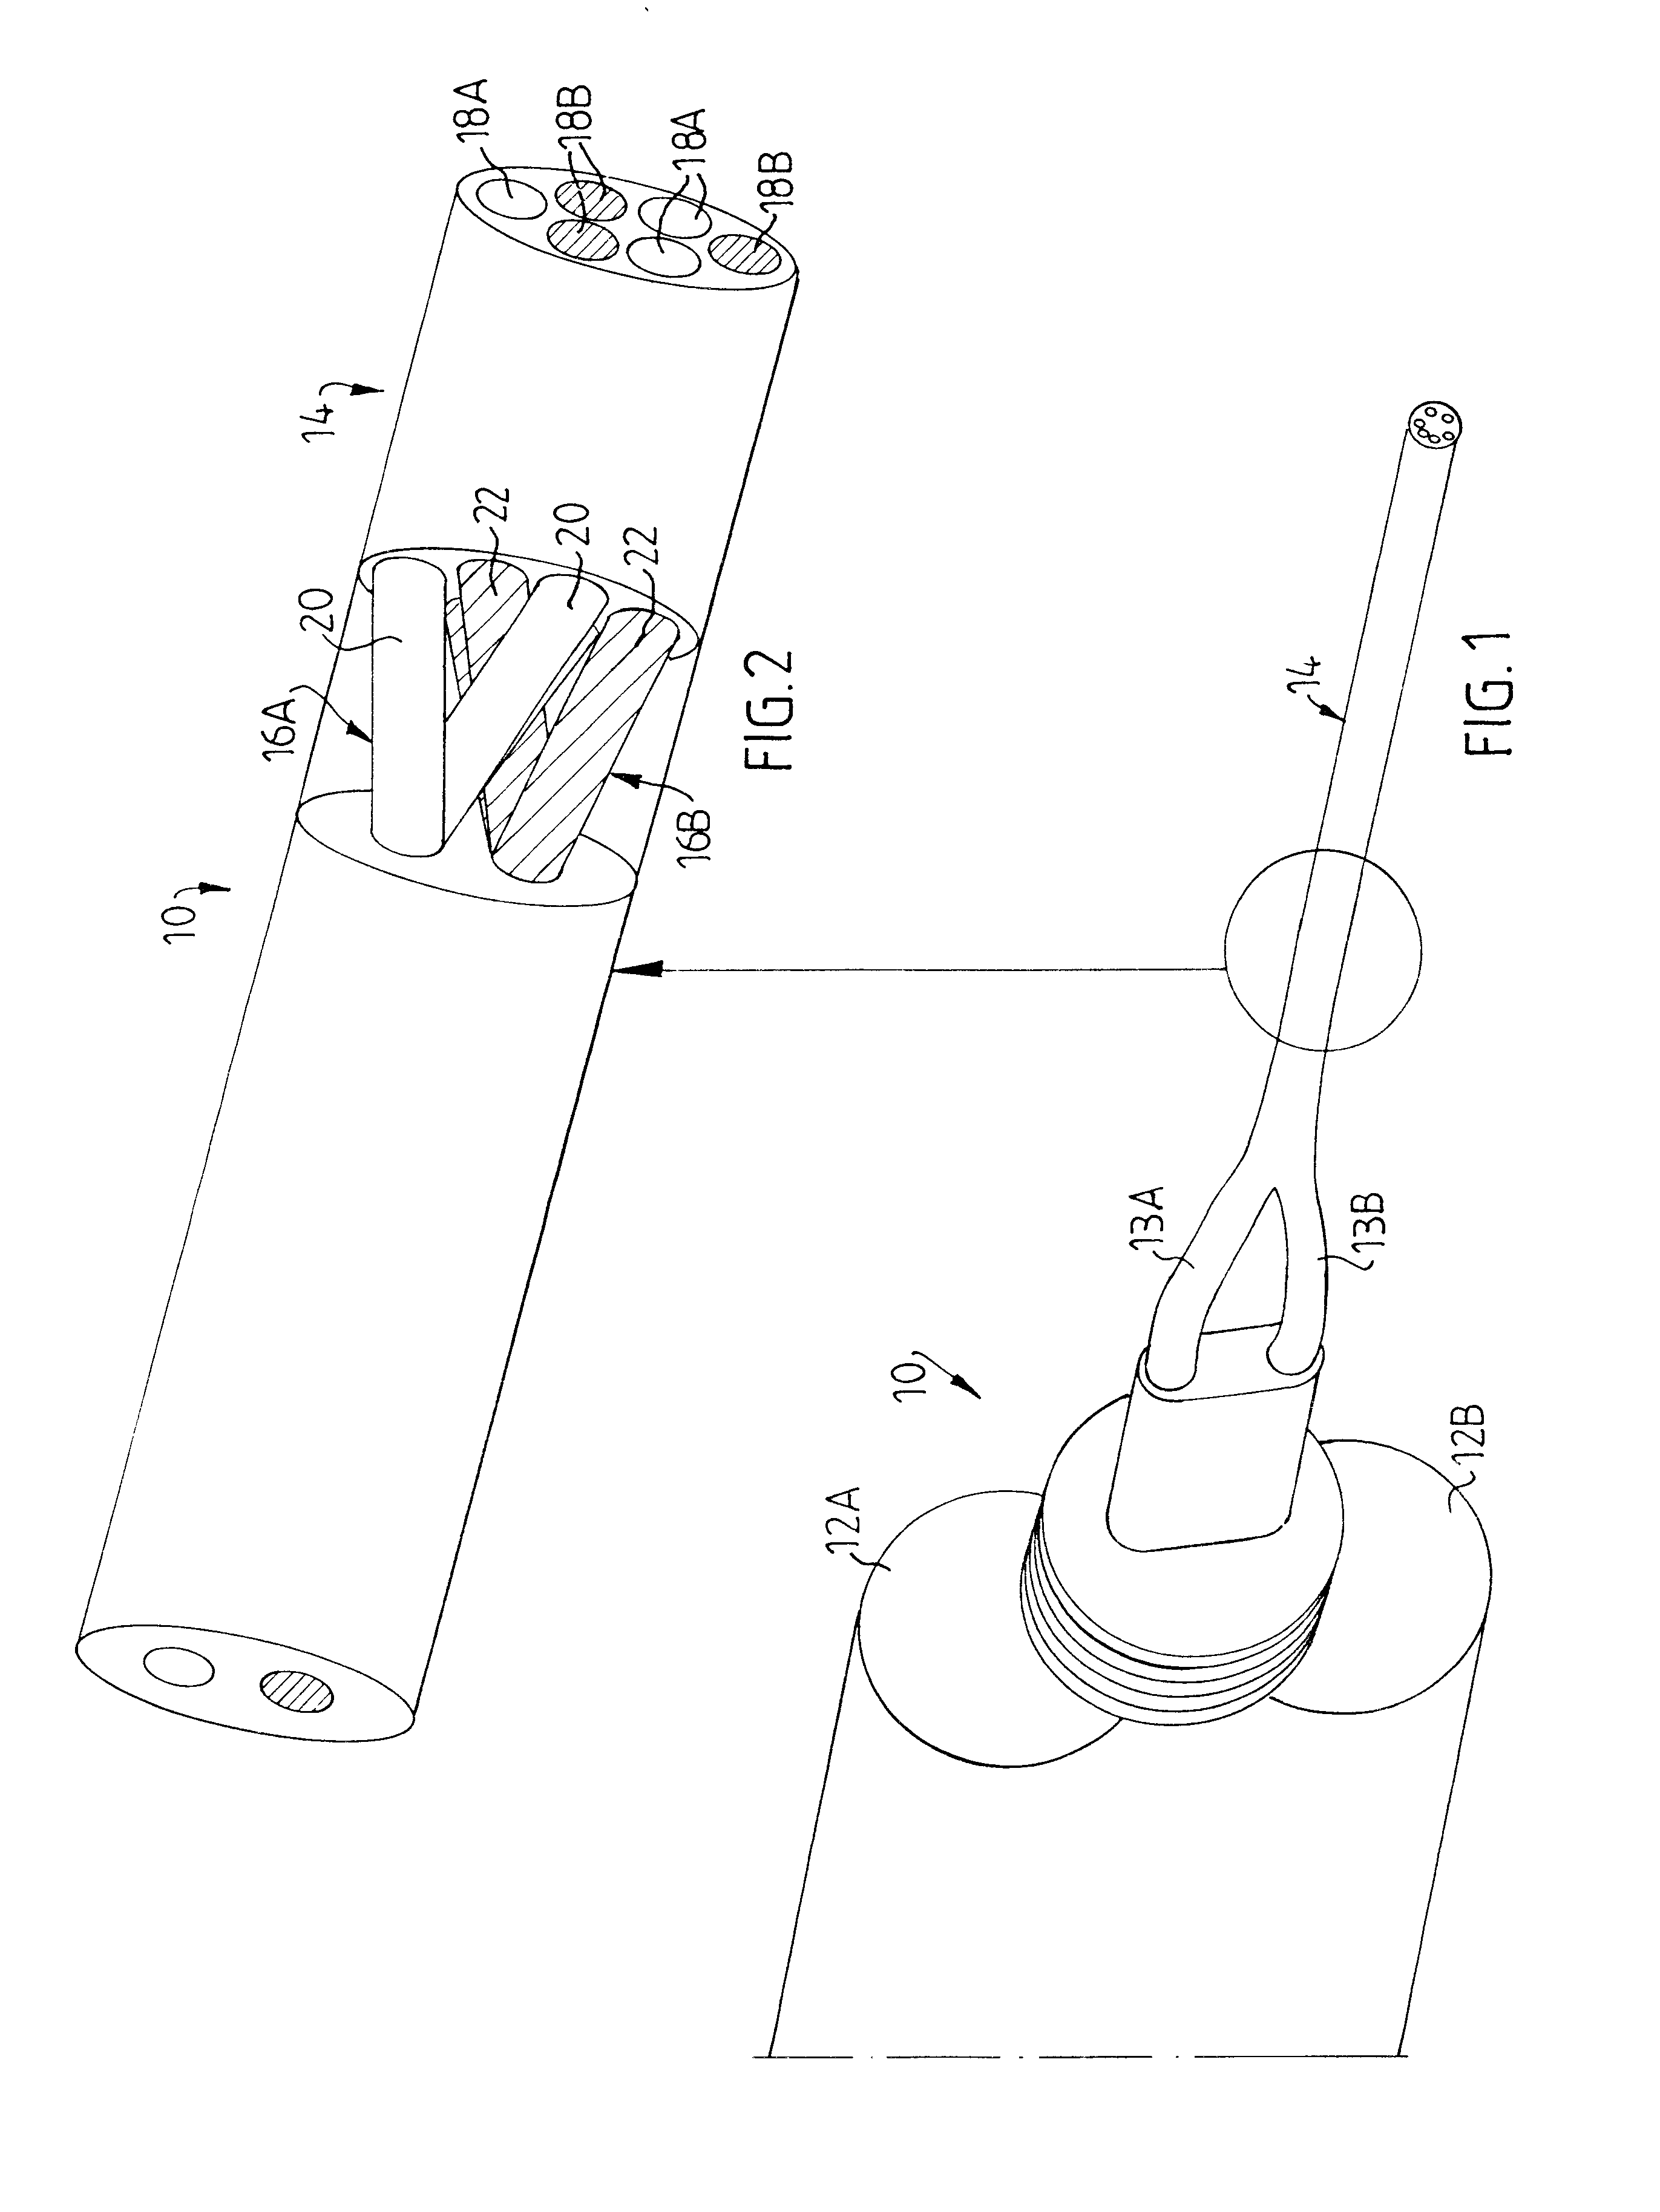 Device and method for dispensing at least two mutually reactive components